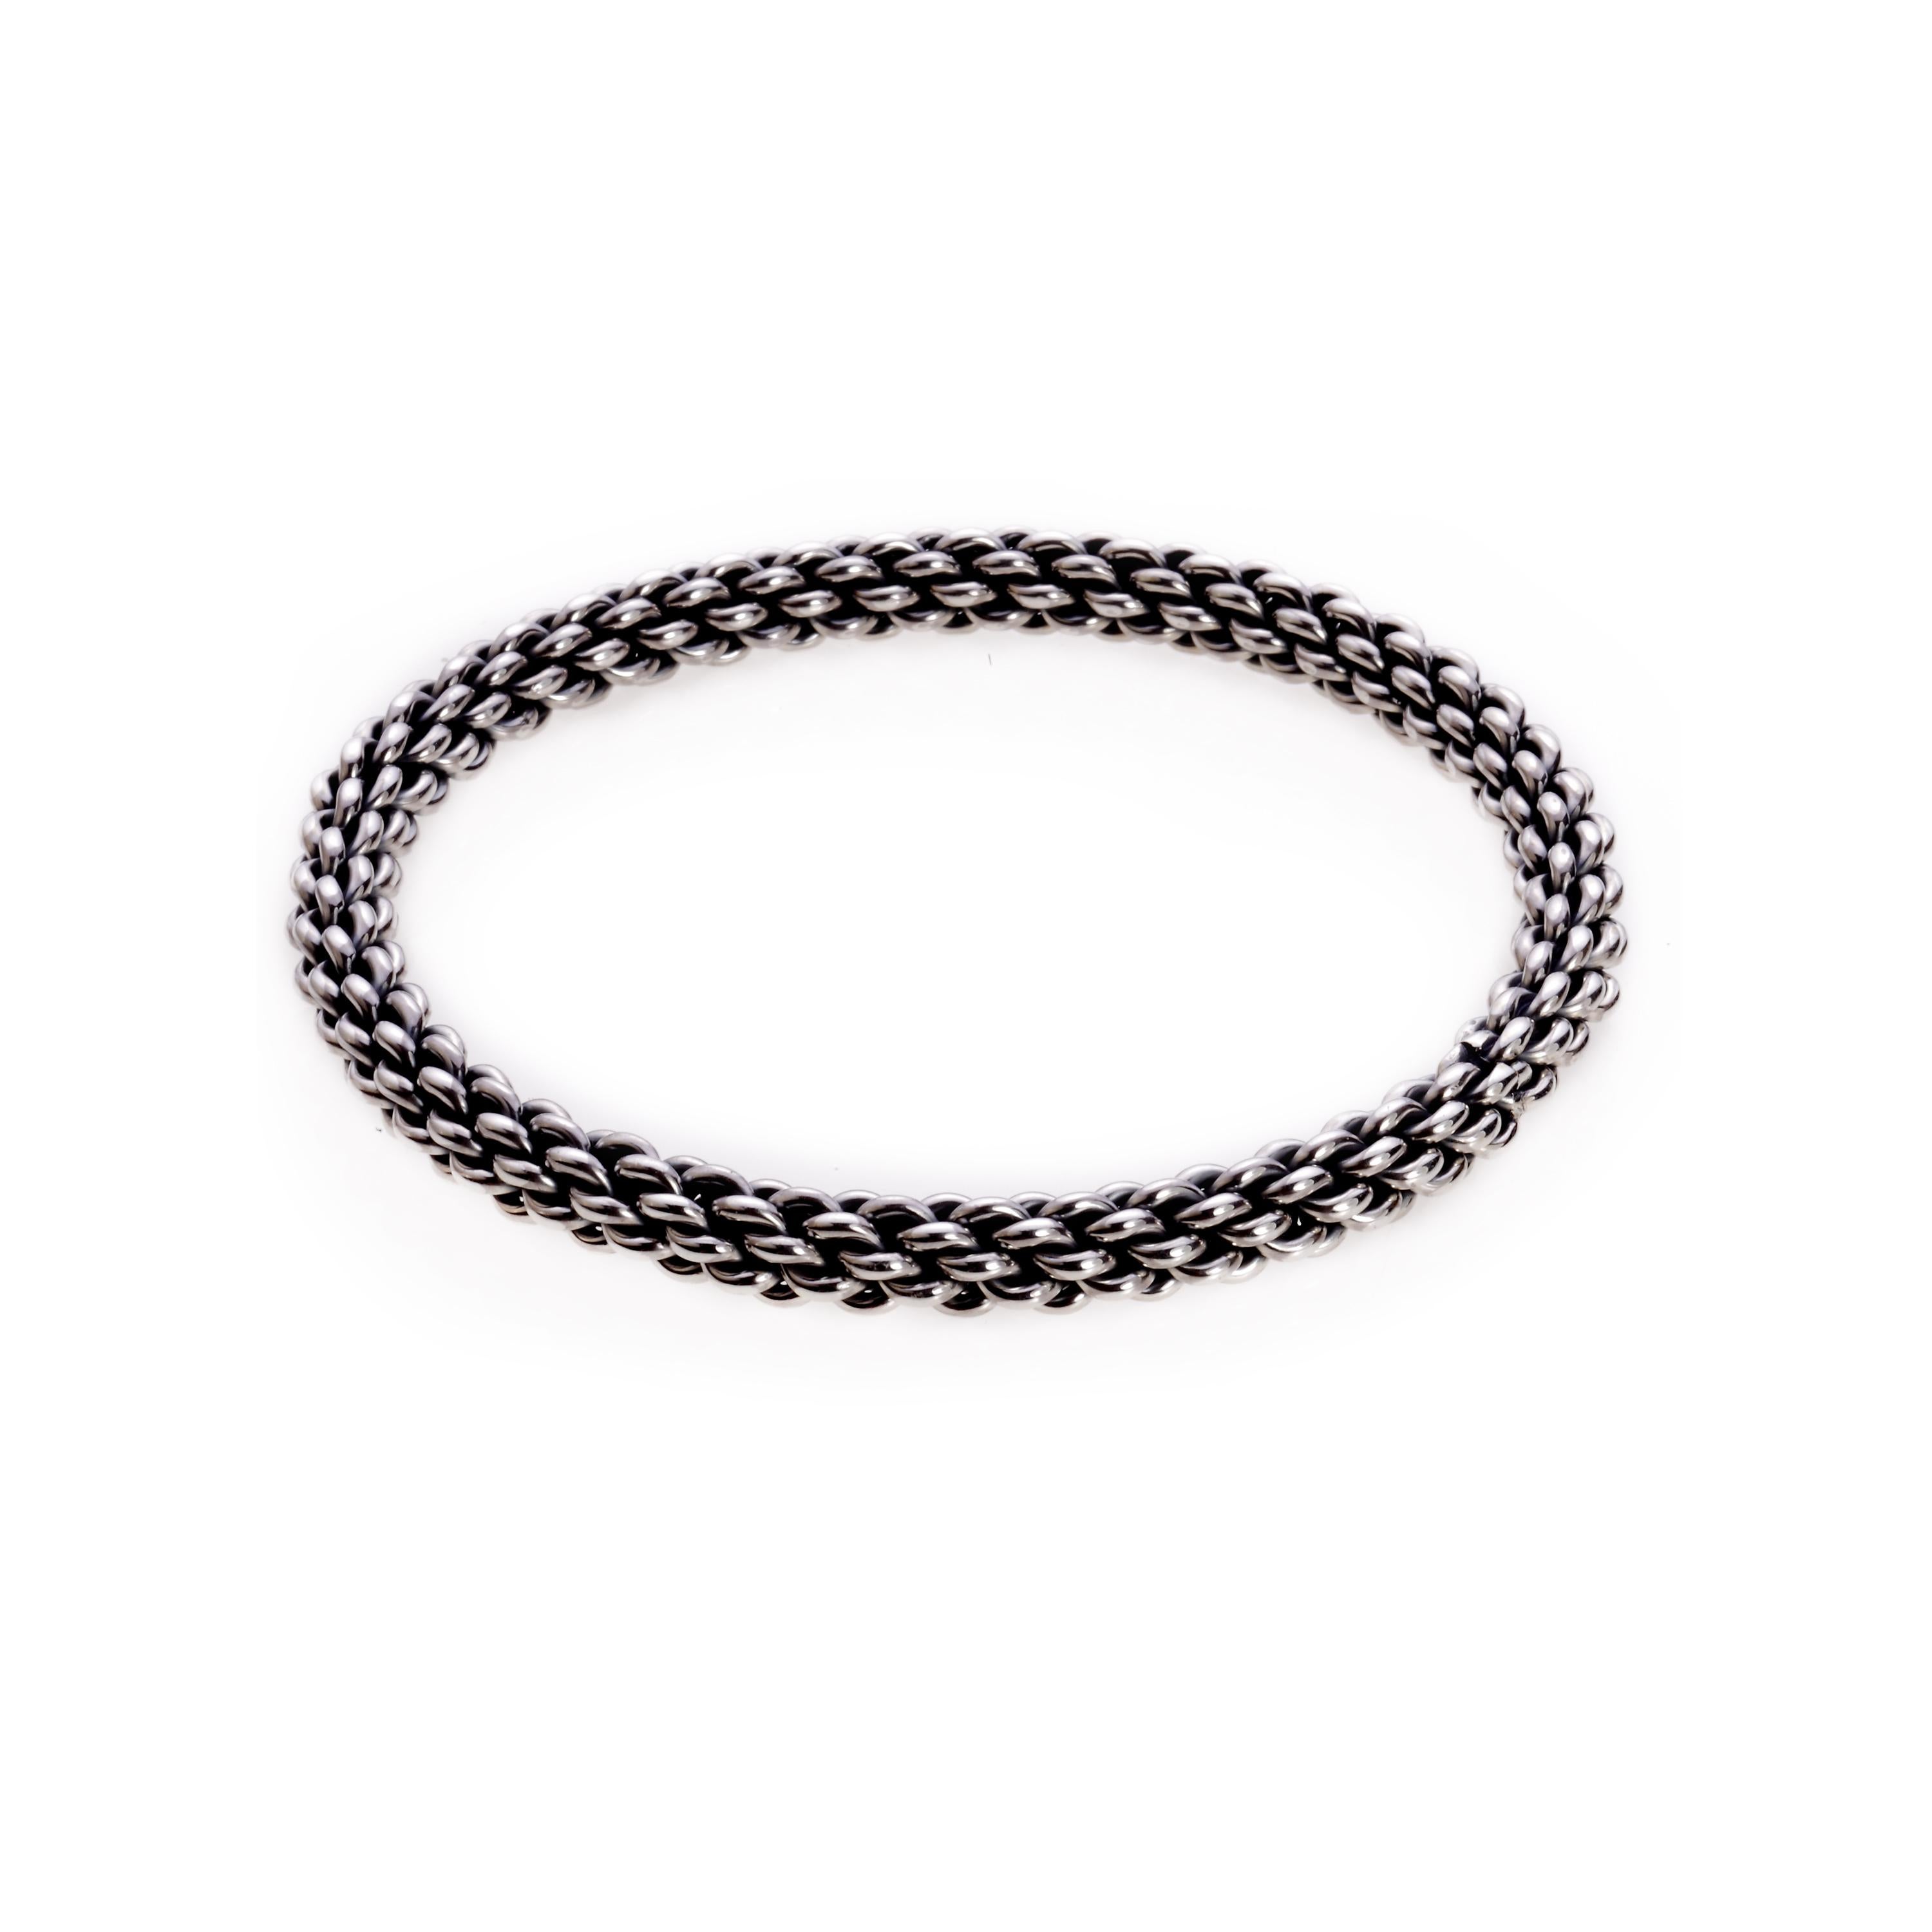 This bangle is one of Sant's most iconic pieces. It was designed in the 1940's and has become a classic Barcelona jewelry piece.
It is entirely handbraided in Barcelona.
3 sizes available:  
-Small
-Medium
-Large

Can also be done in 18k yellow gold